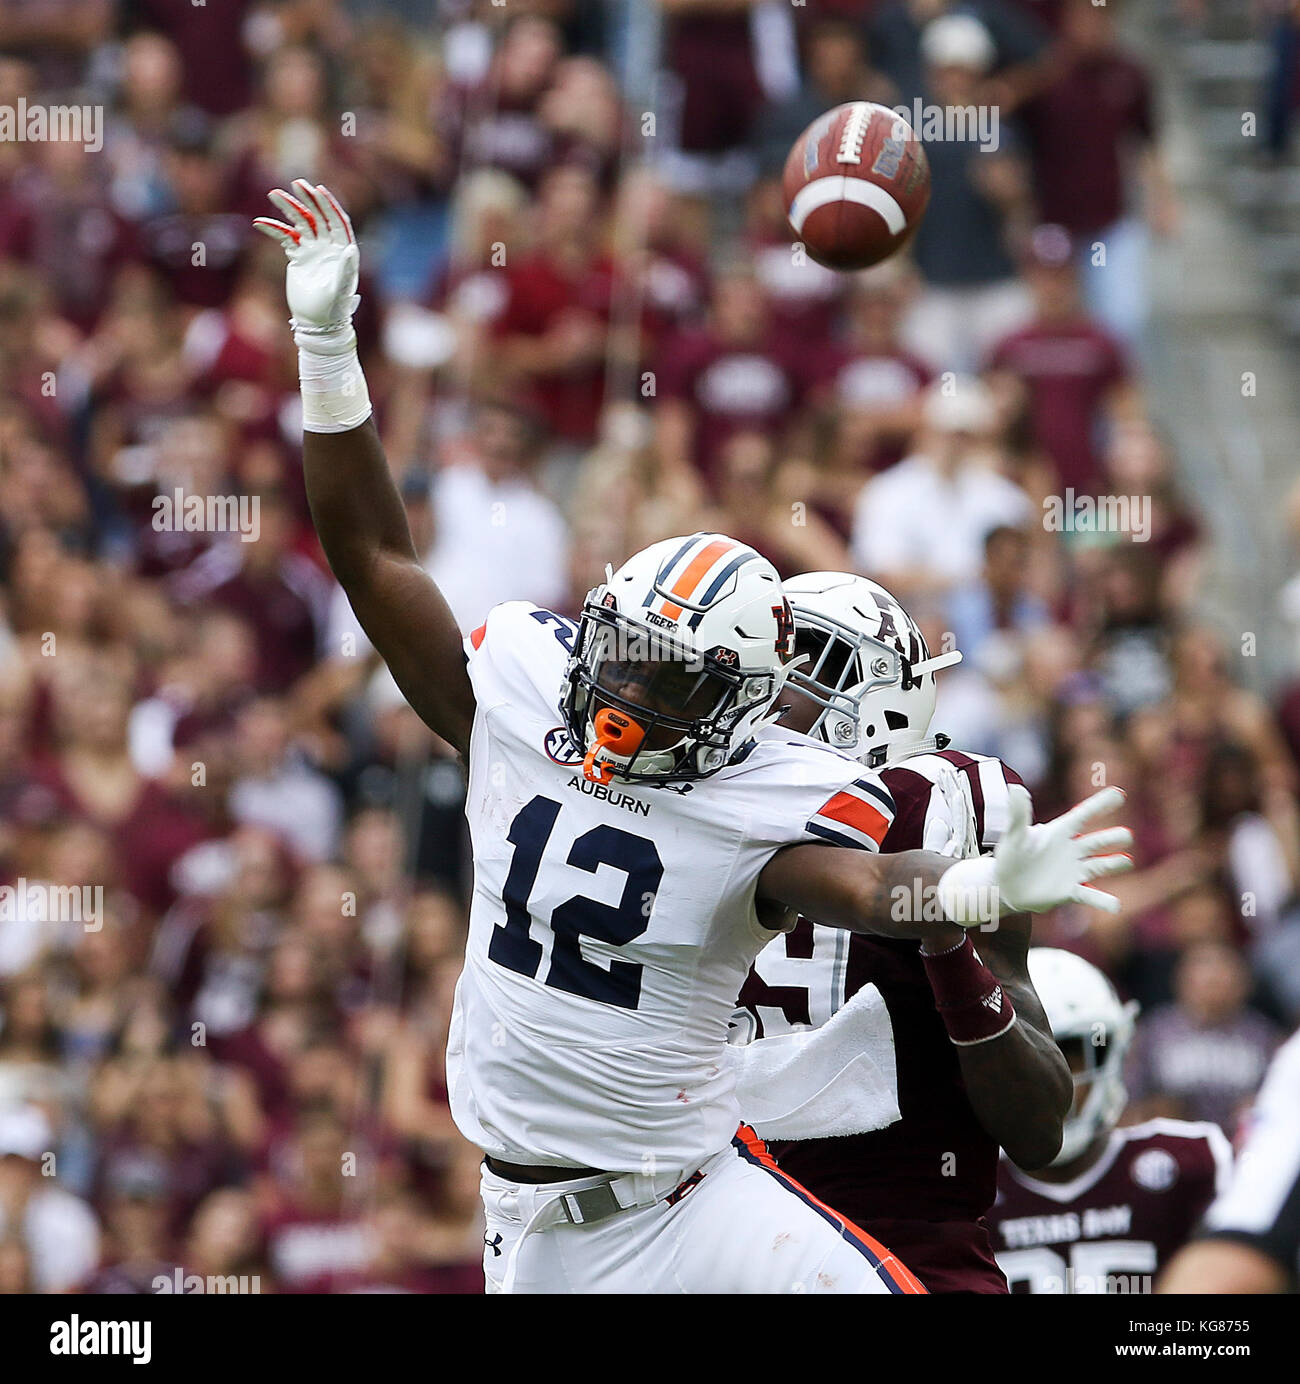 November 4, 2017: Auburn Tigers wide receiver Eli Stove (12) reaches for a pass that sails over his head in the second quarter during the NCAA football game between the Auburn Tigers and the Texas A&M Aggies at Kyle Field in College Station, TX; John Glaser/CSM. Stock Photo